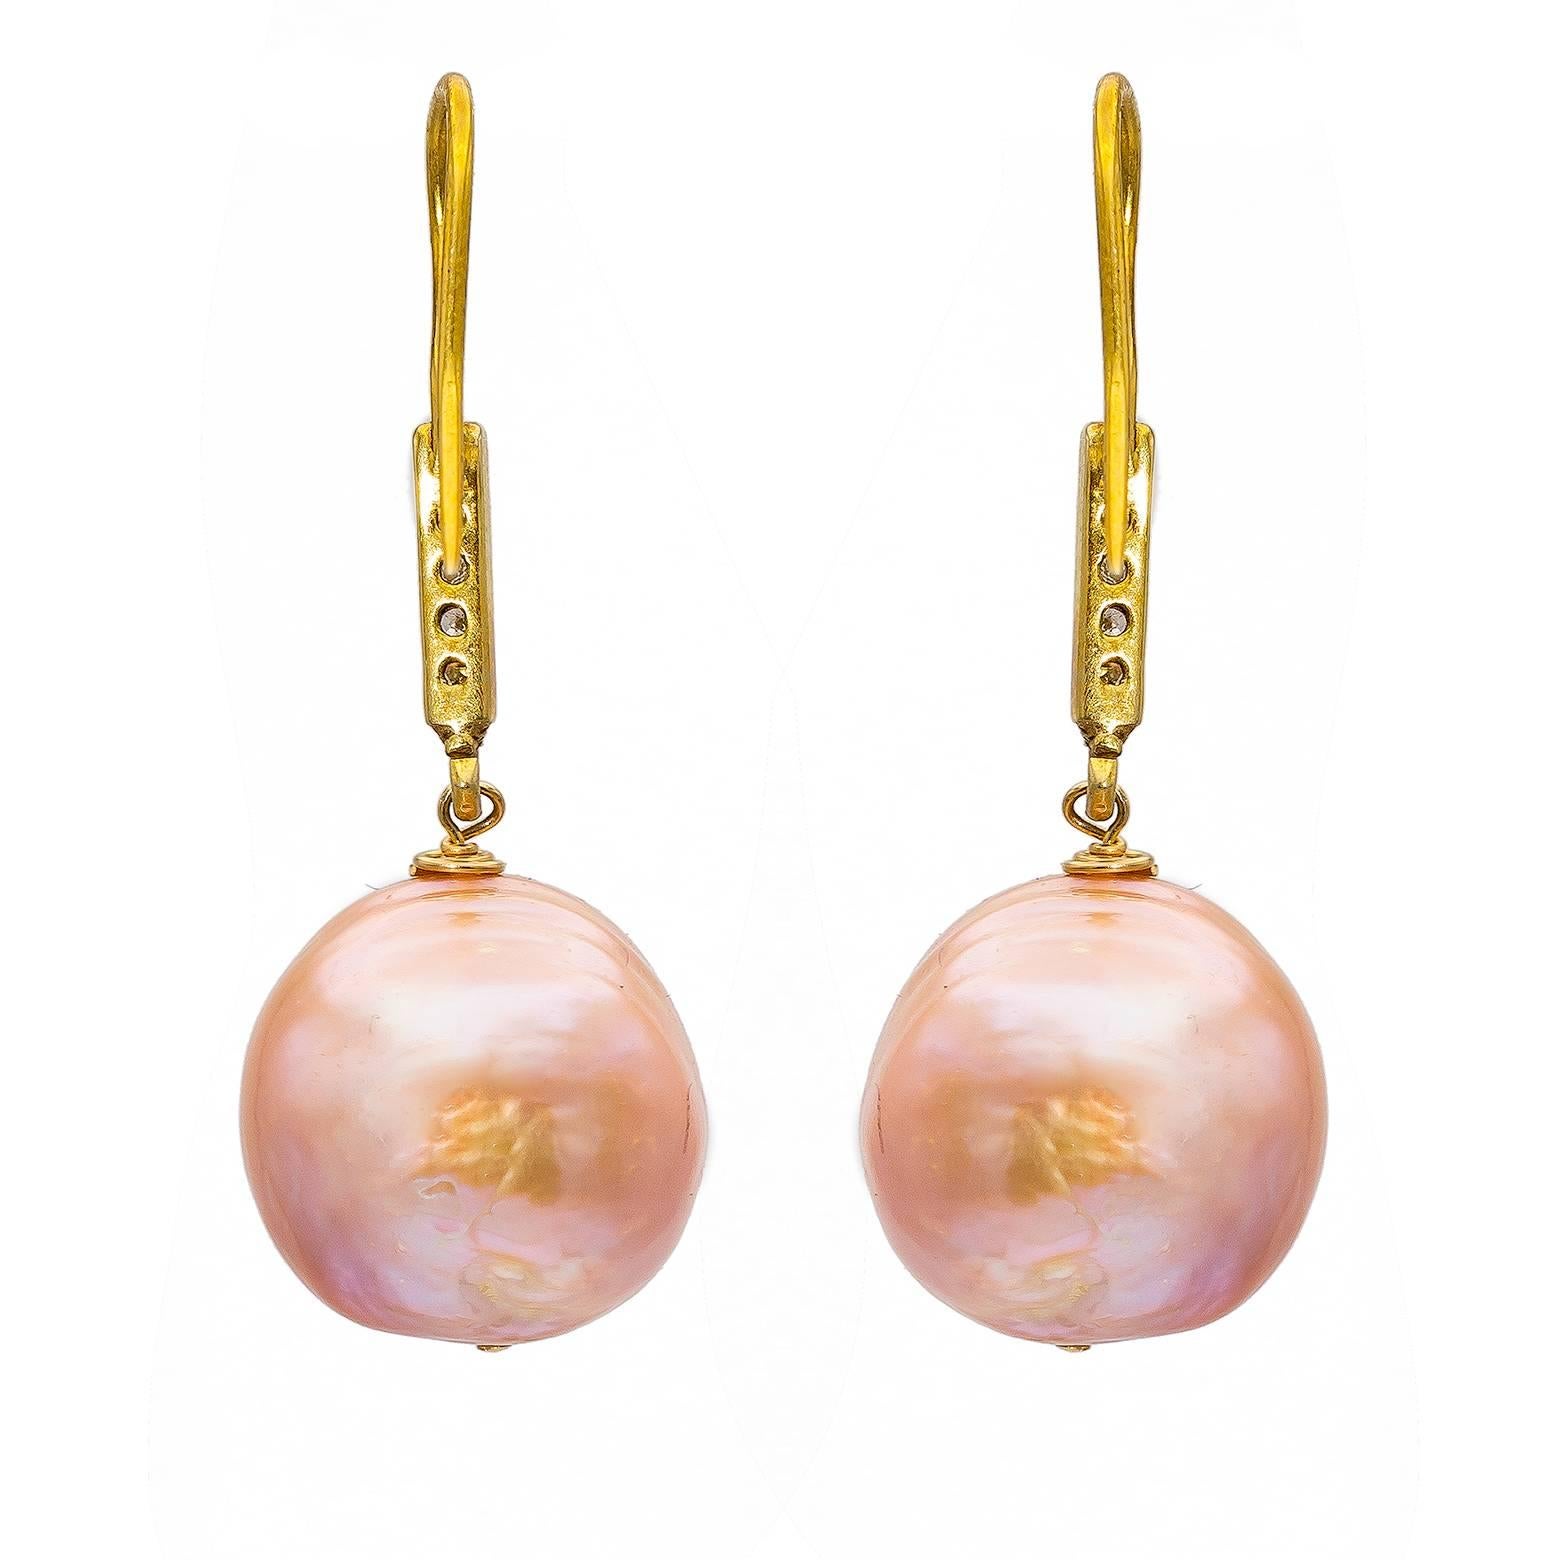 These are the perfect pair of pearl earrings! The pink shade of these pearls is luminescent and matched to any skin tone to bring out the blush in your skin. The Oxidized and diamond bar beautifully accents the brightness of the 22k gold